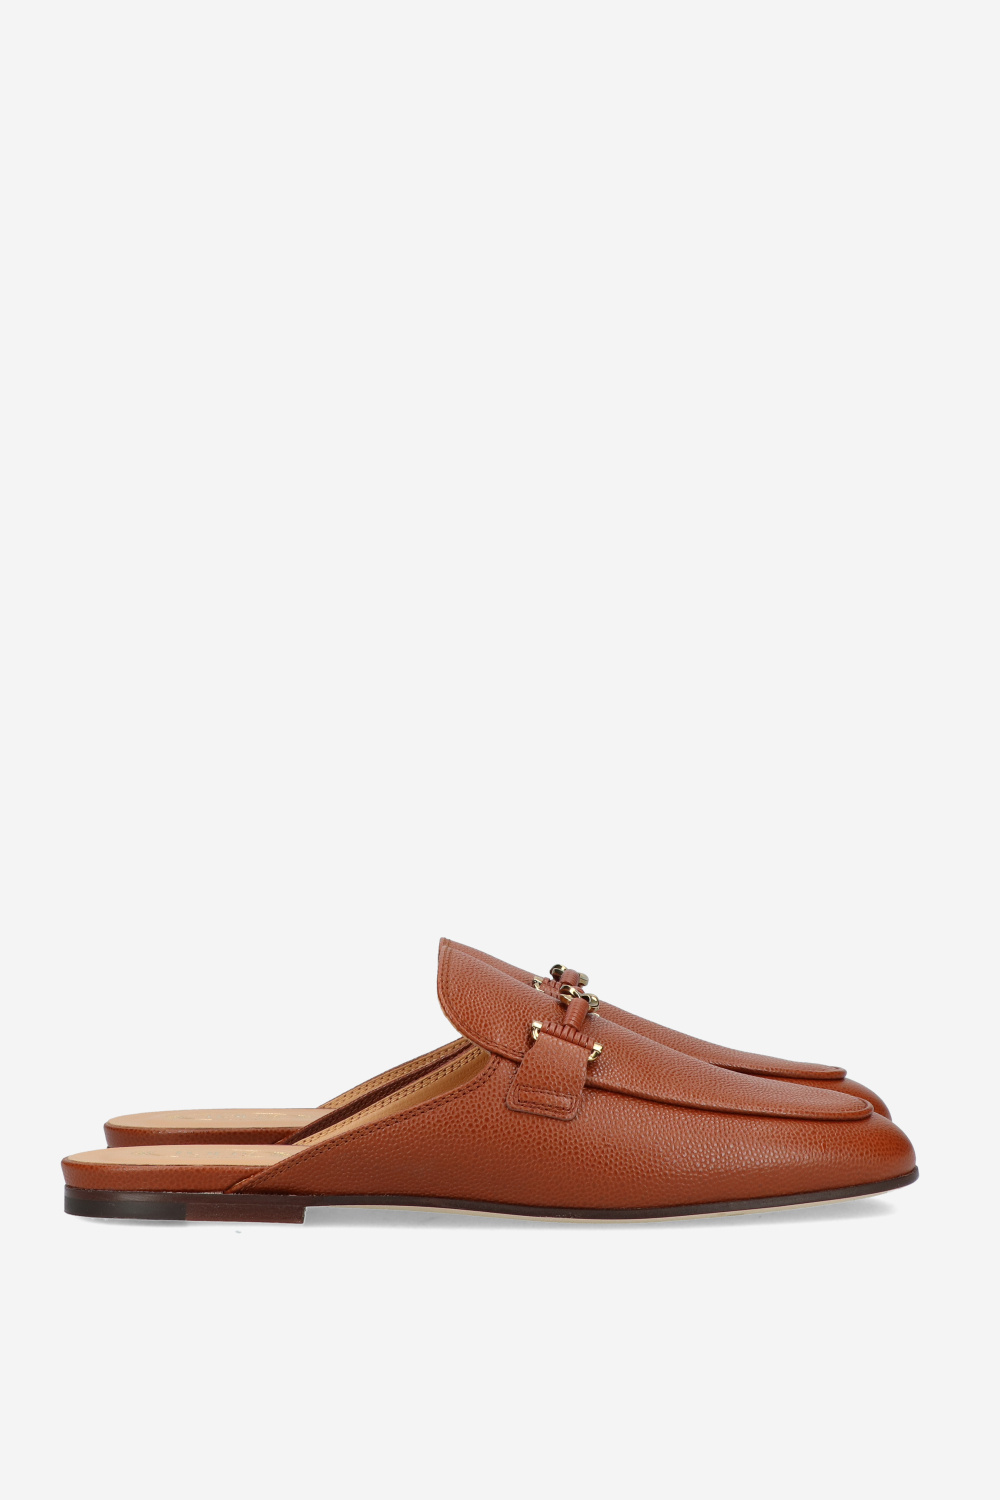 Tods Mules Brown